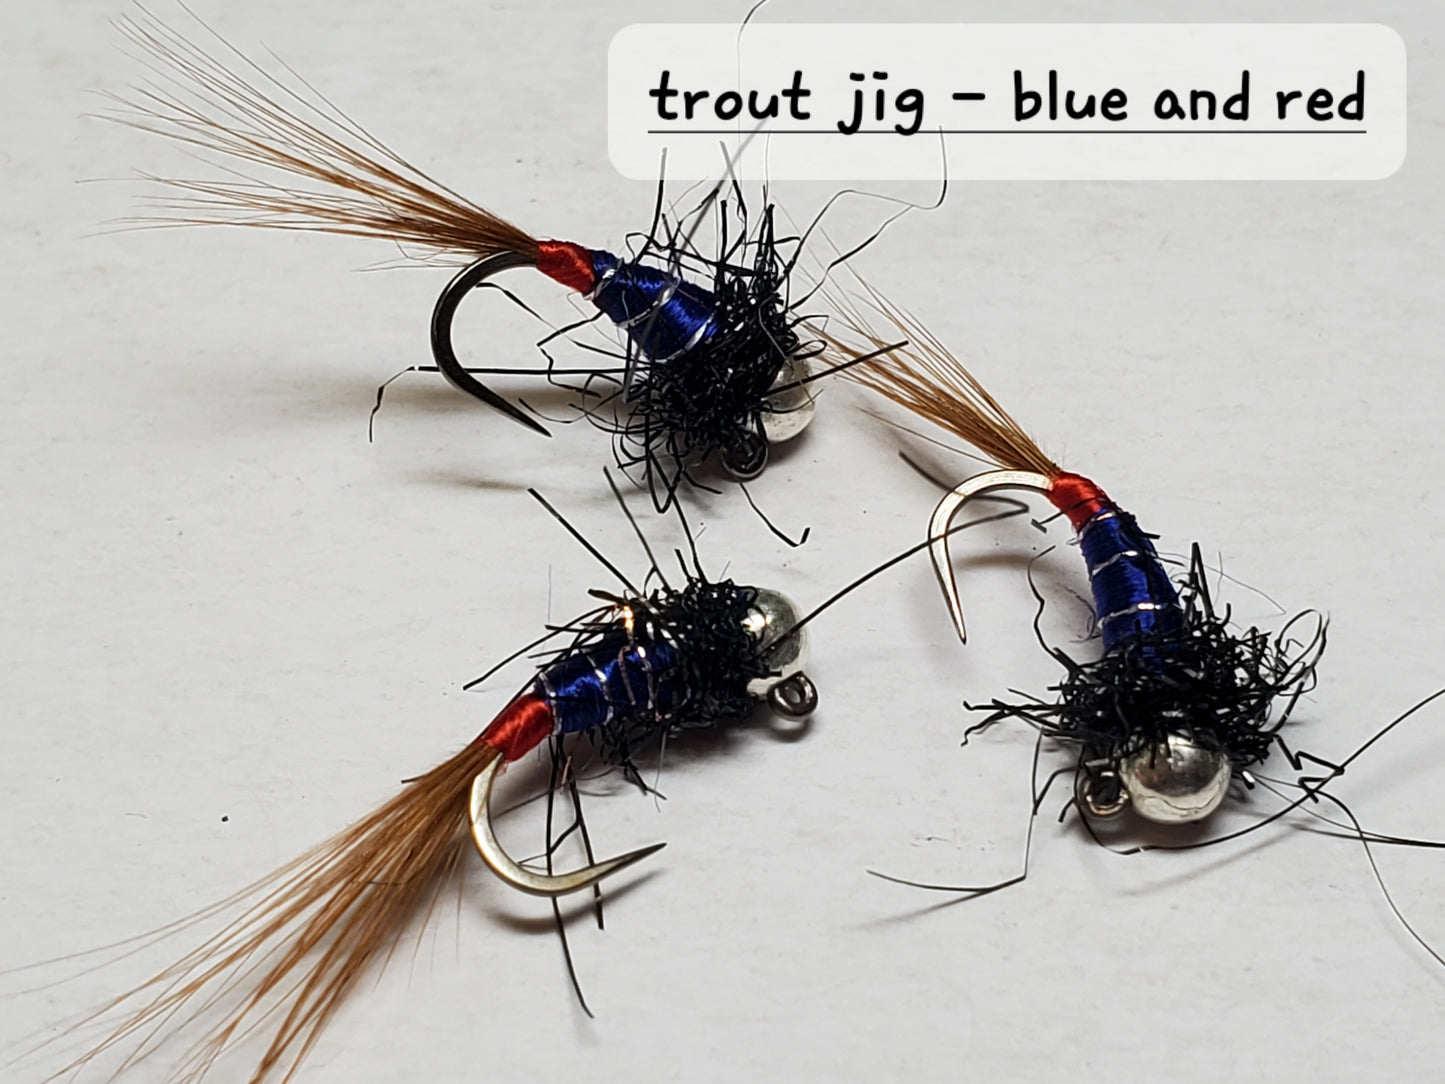 Trout Jig, Tungsten Bead Head Trout Jig, Trout Jig Nymph, Bead Head Nymph, Trout Jig Black and Blue Red Tag